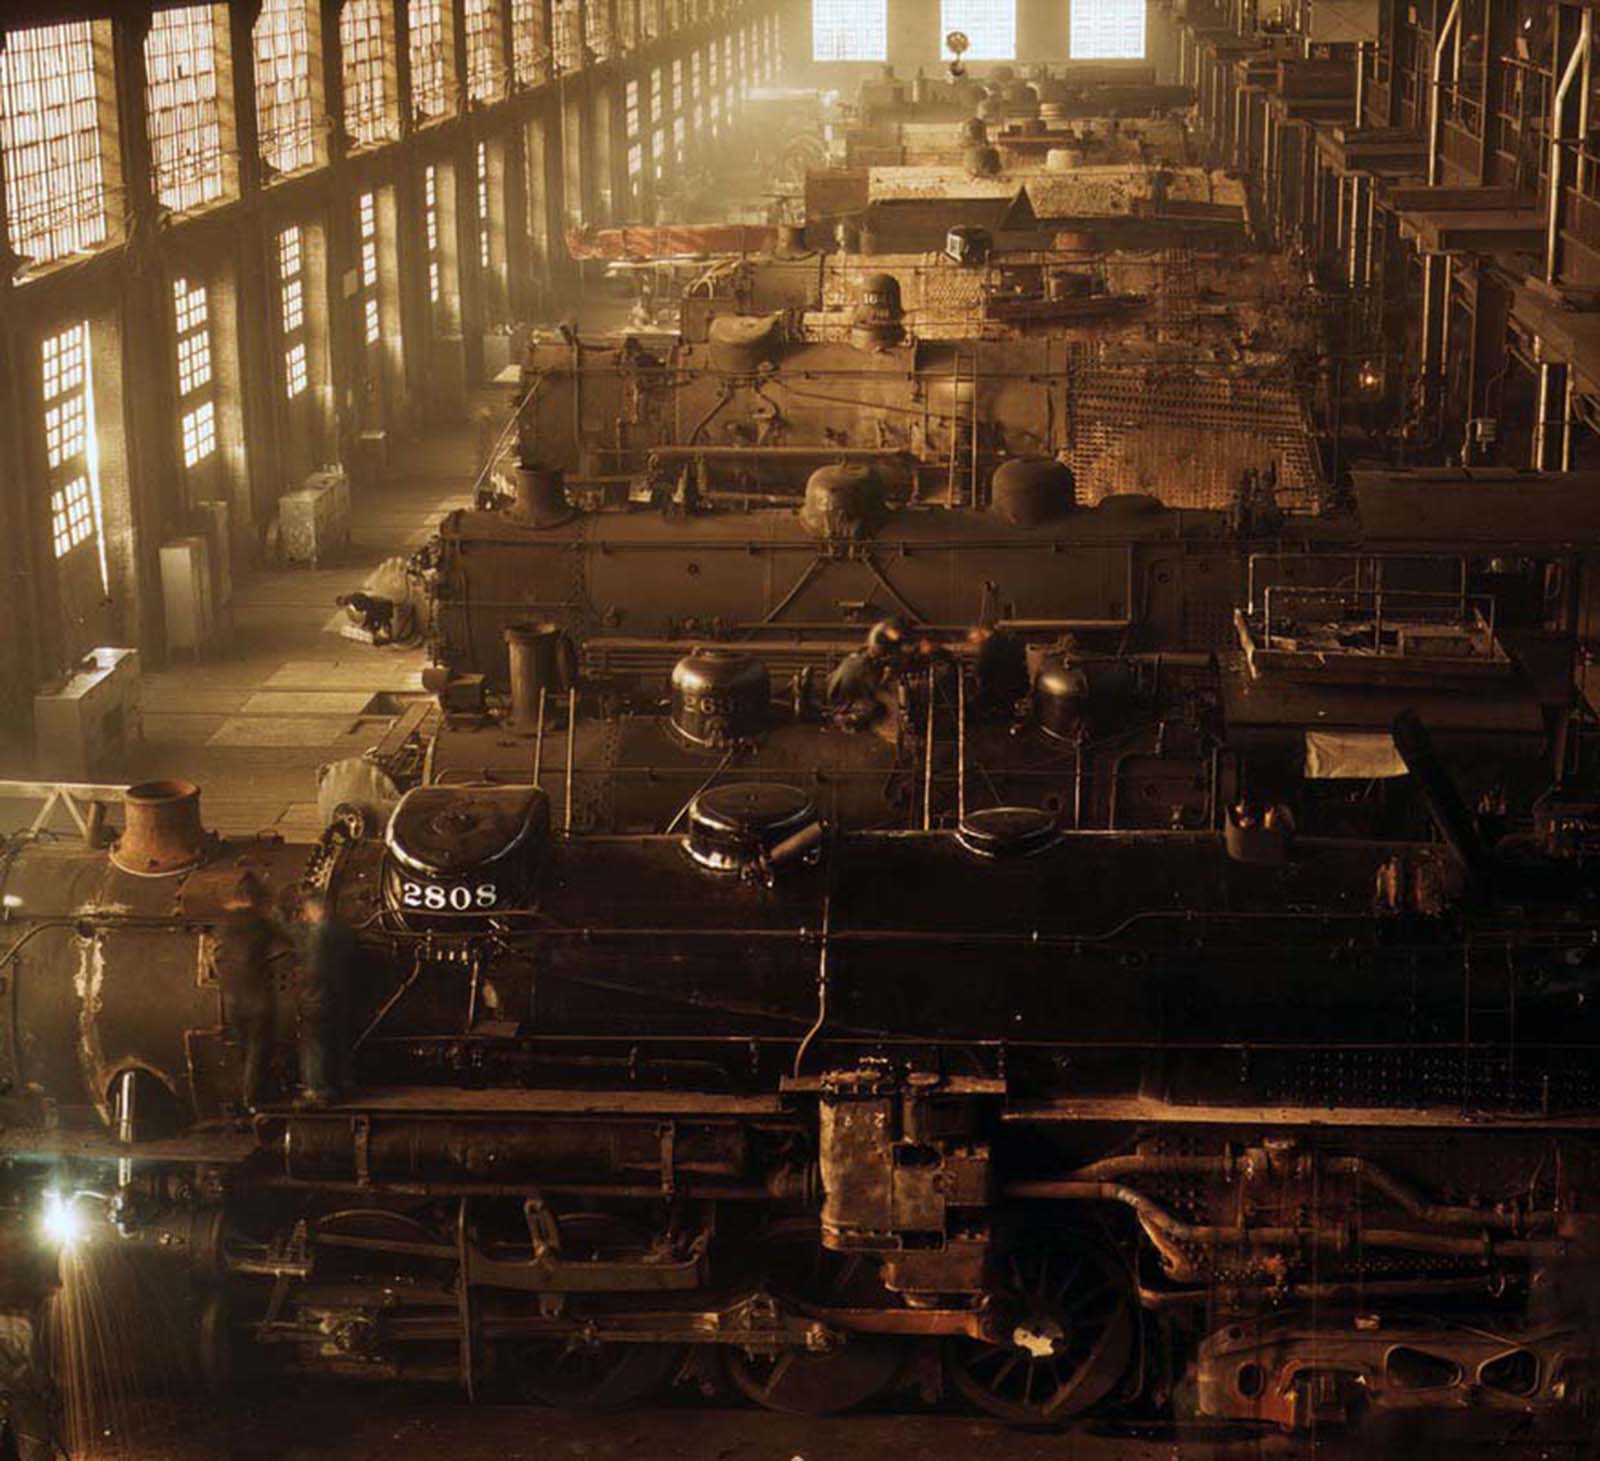 Chicago and North Western Railroad locomotive shops, photographed in December 1942.